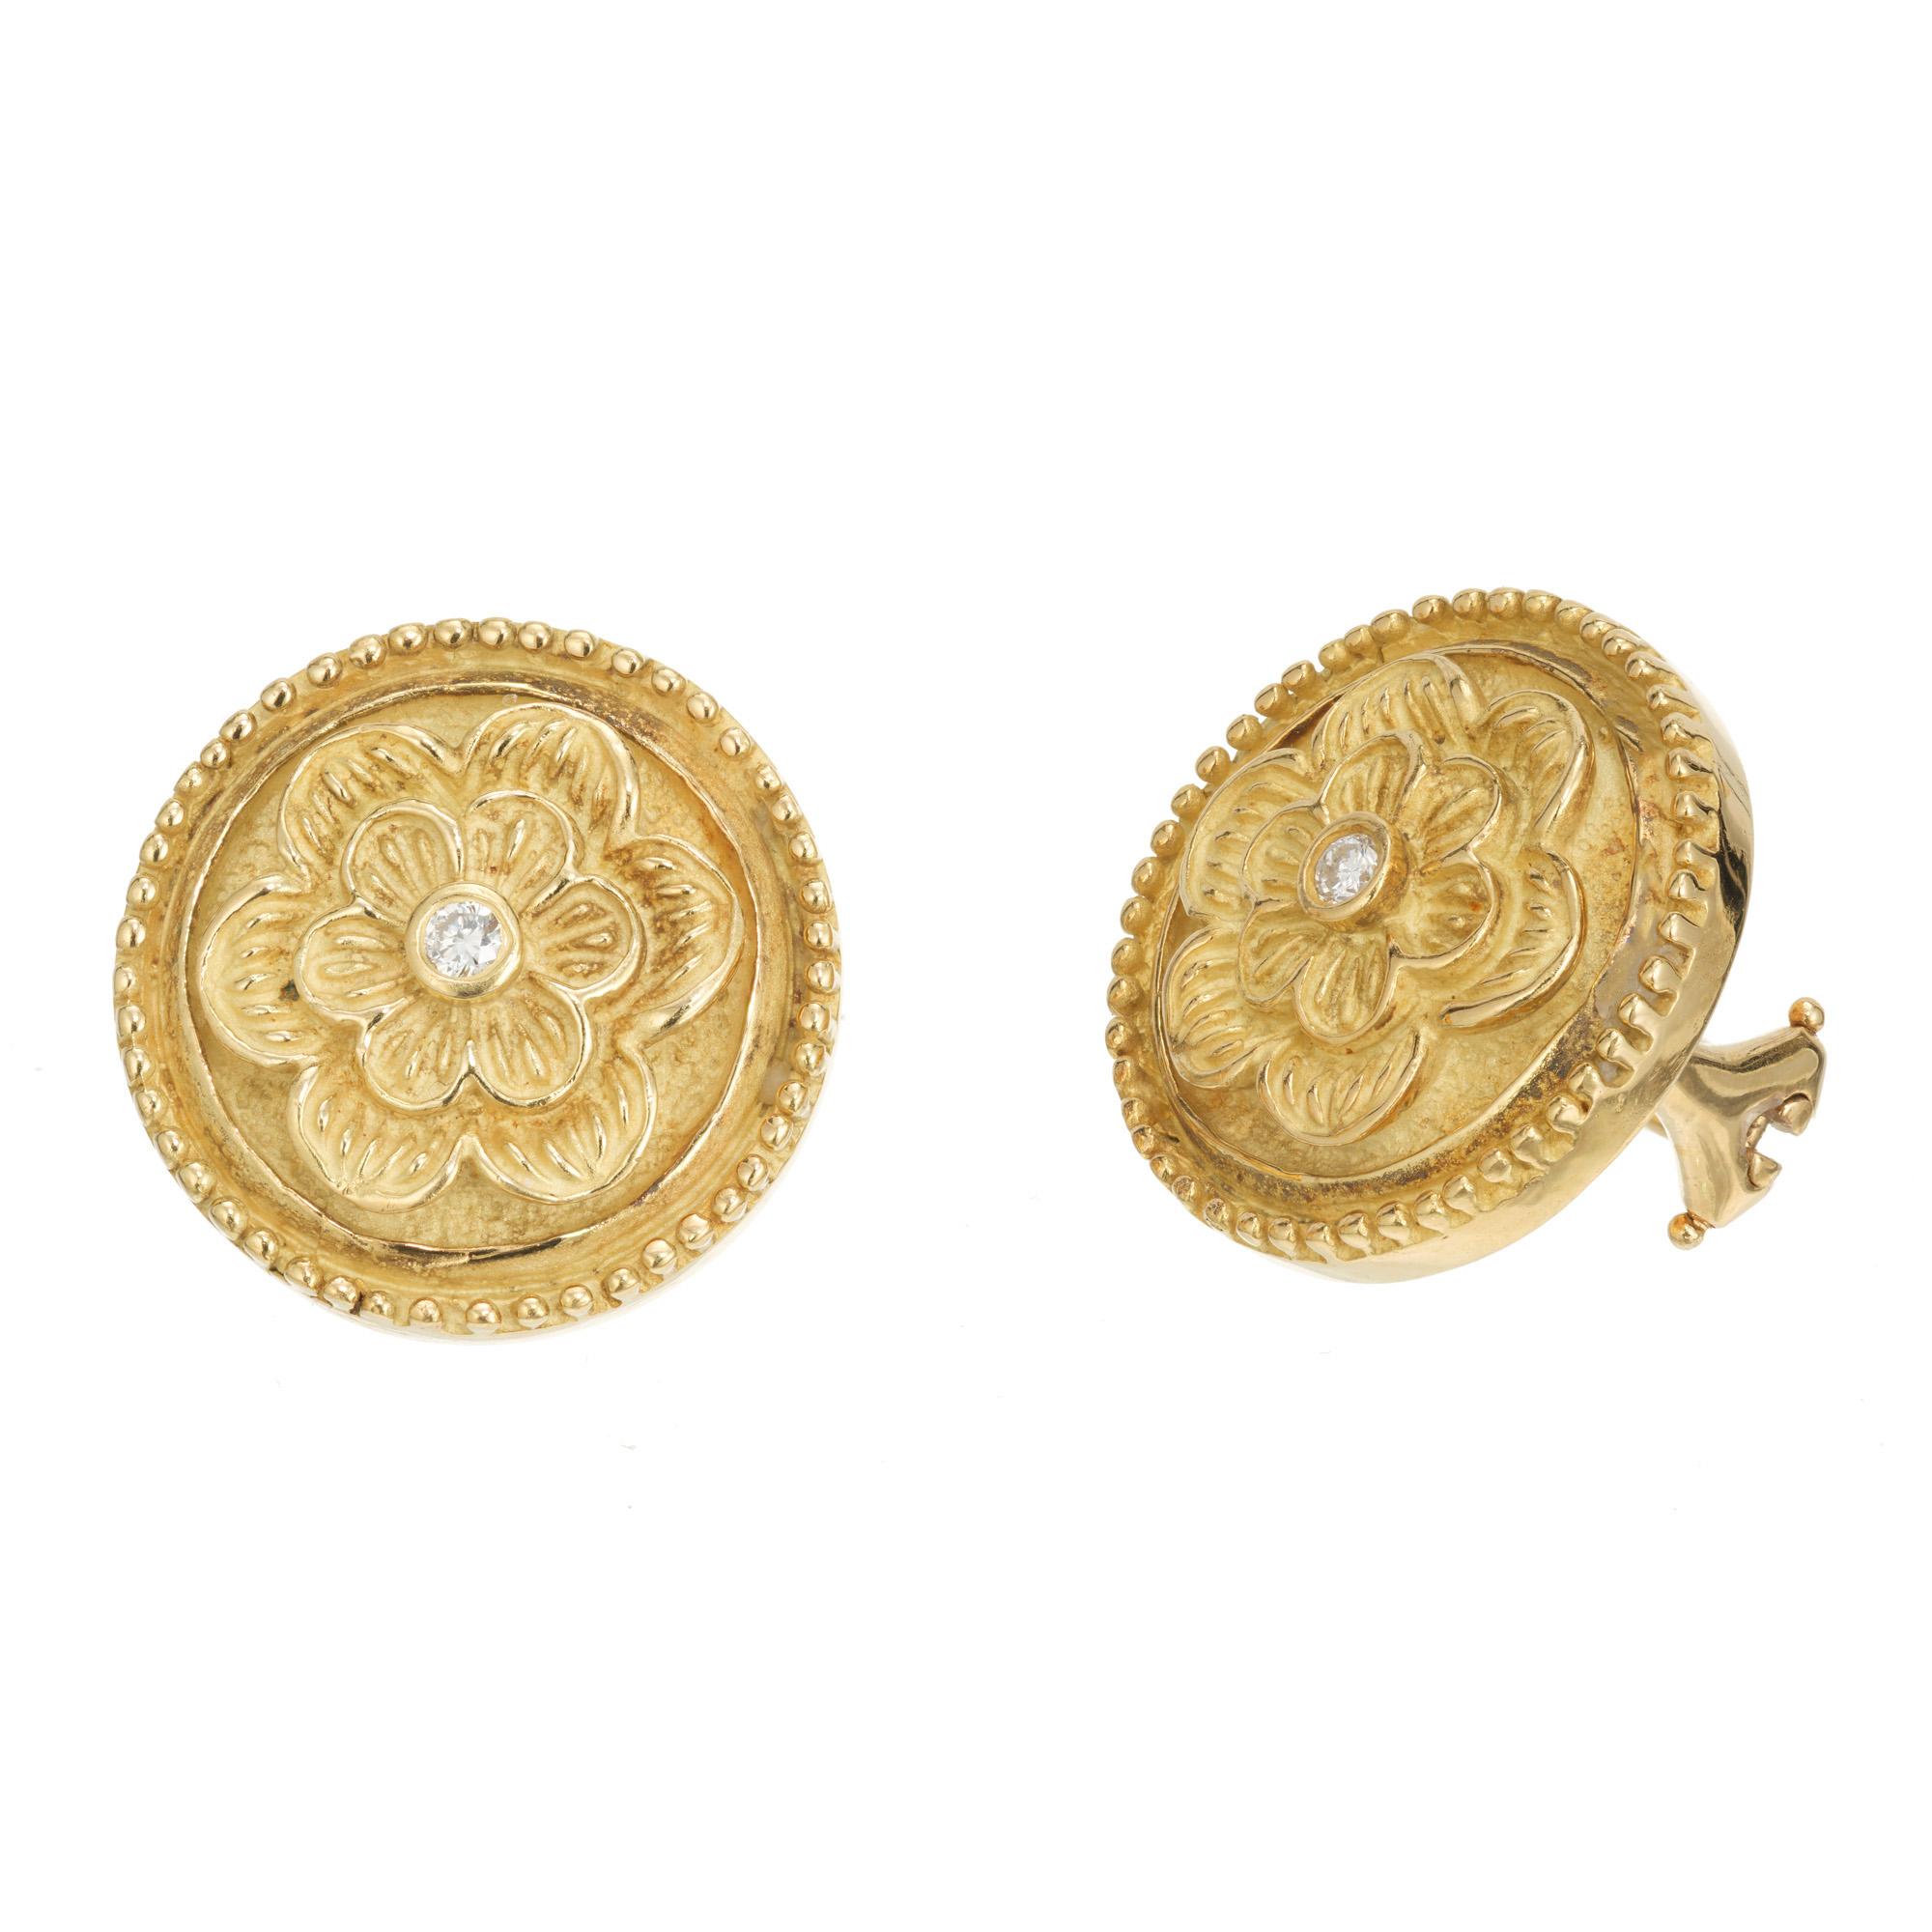 18k green gold button style round flower earrings with textured background. Designer signed. 

2 full cut diamonds, approx. total weight .06cts, F, VS
18k green gold
Stamped: CDII LURO 750
18.2 grams
Diameter: 18mm or .70 inch
Depth: 4.37mm